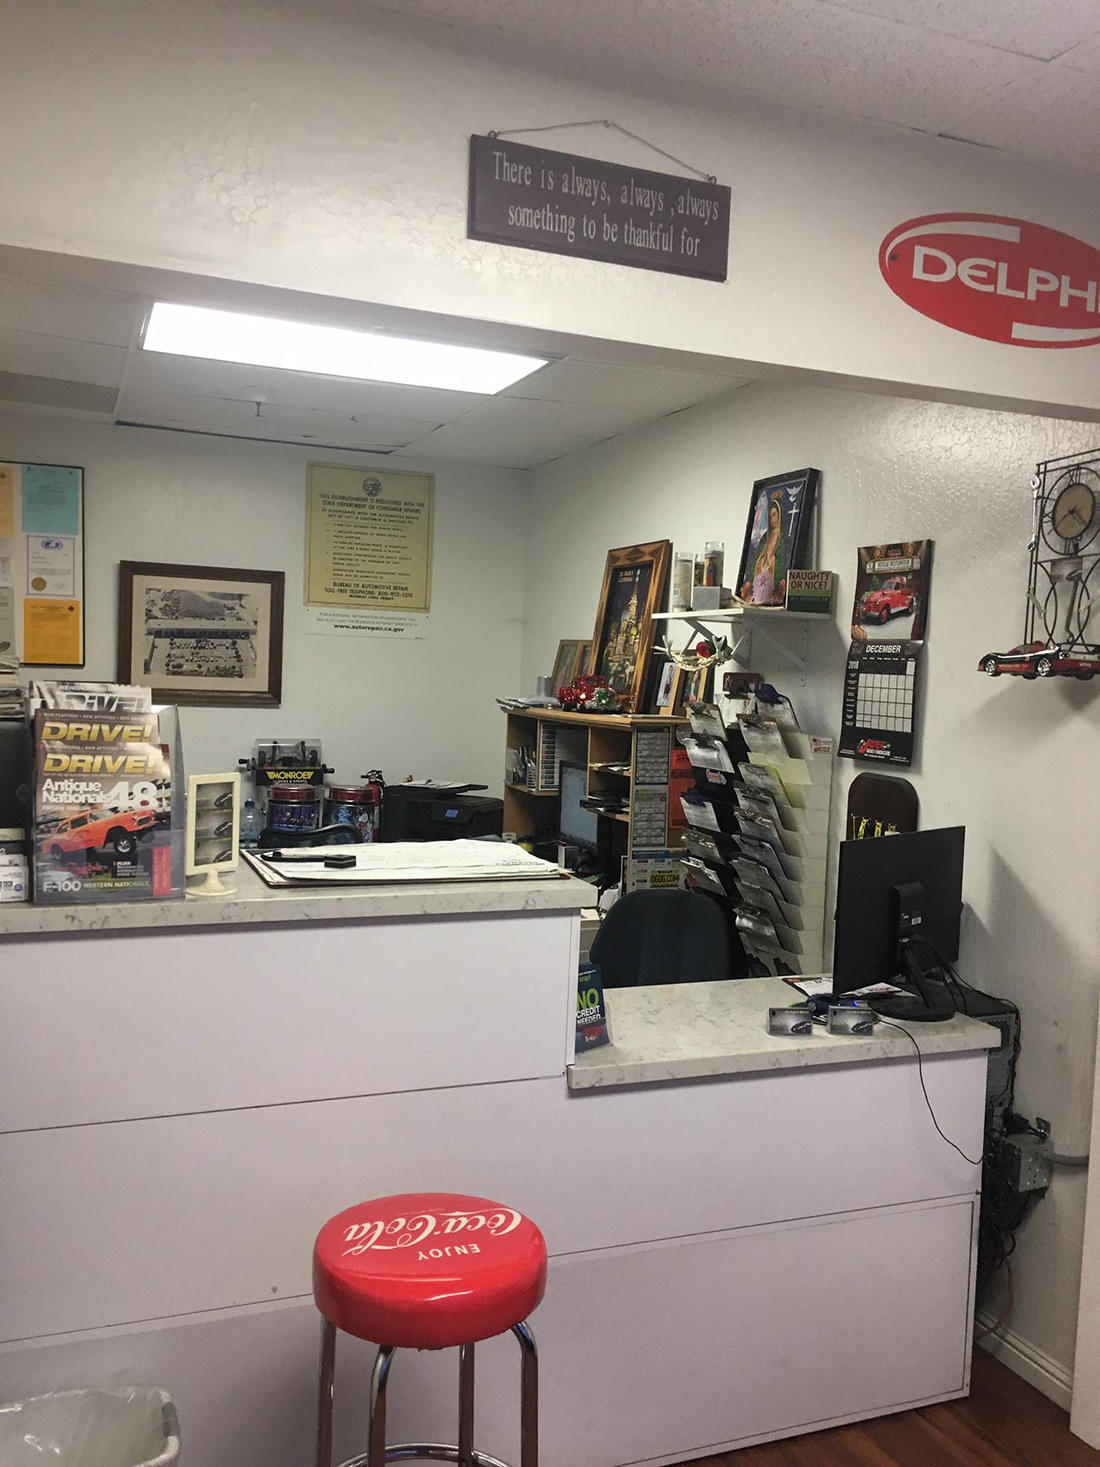 J & J Auto Service & Transmissions is San Jose's top automotive repairs and maintenance shop in CA J & J Auto Service & Transmissions San Jose (408)578-0871